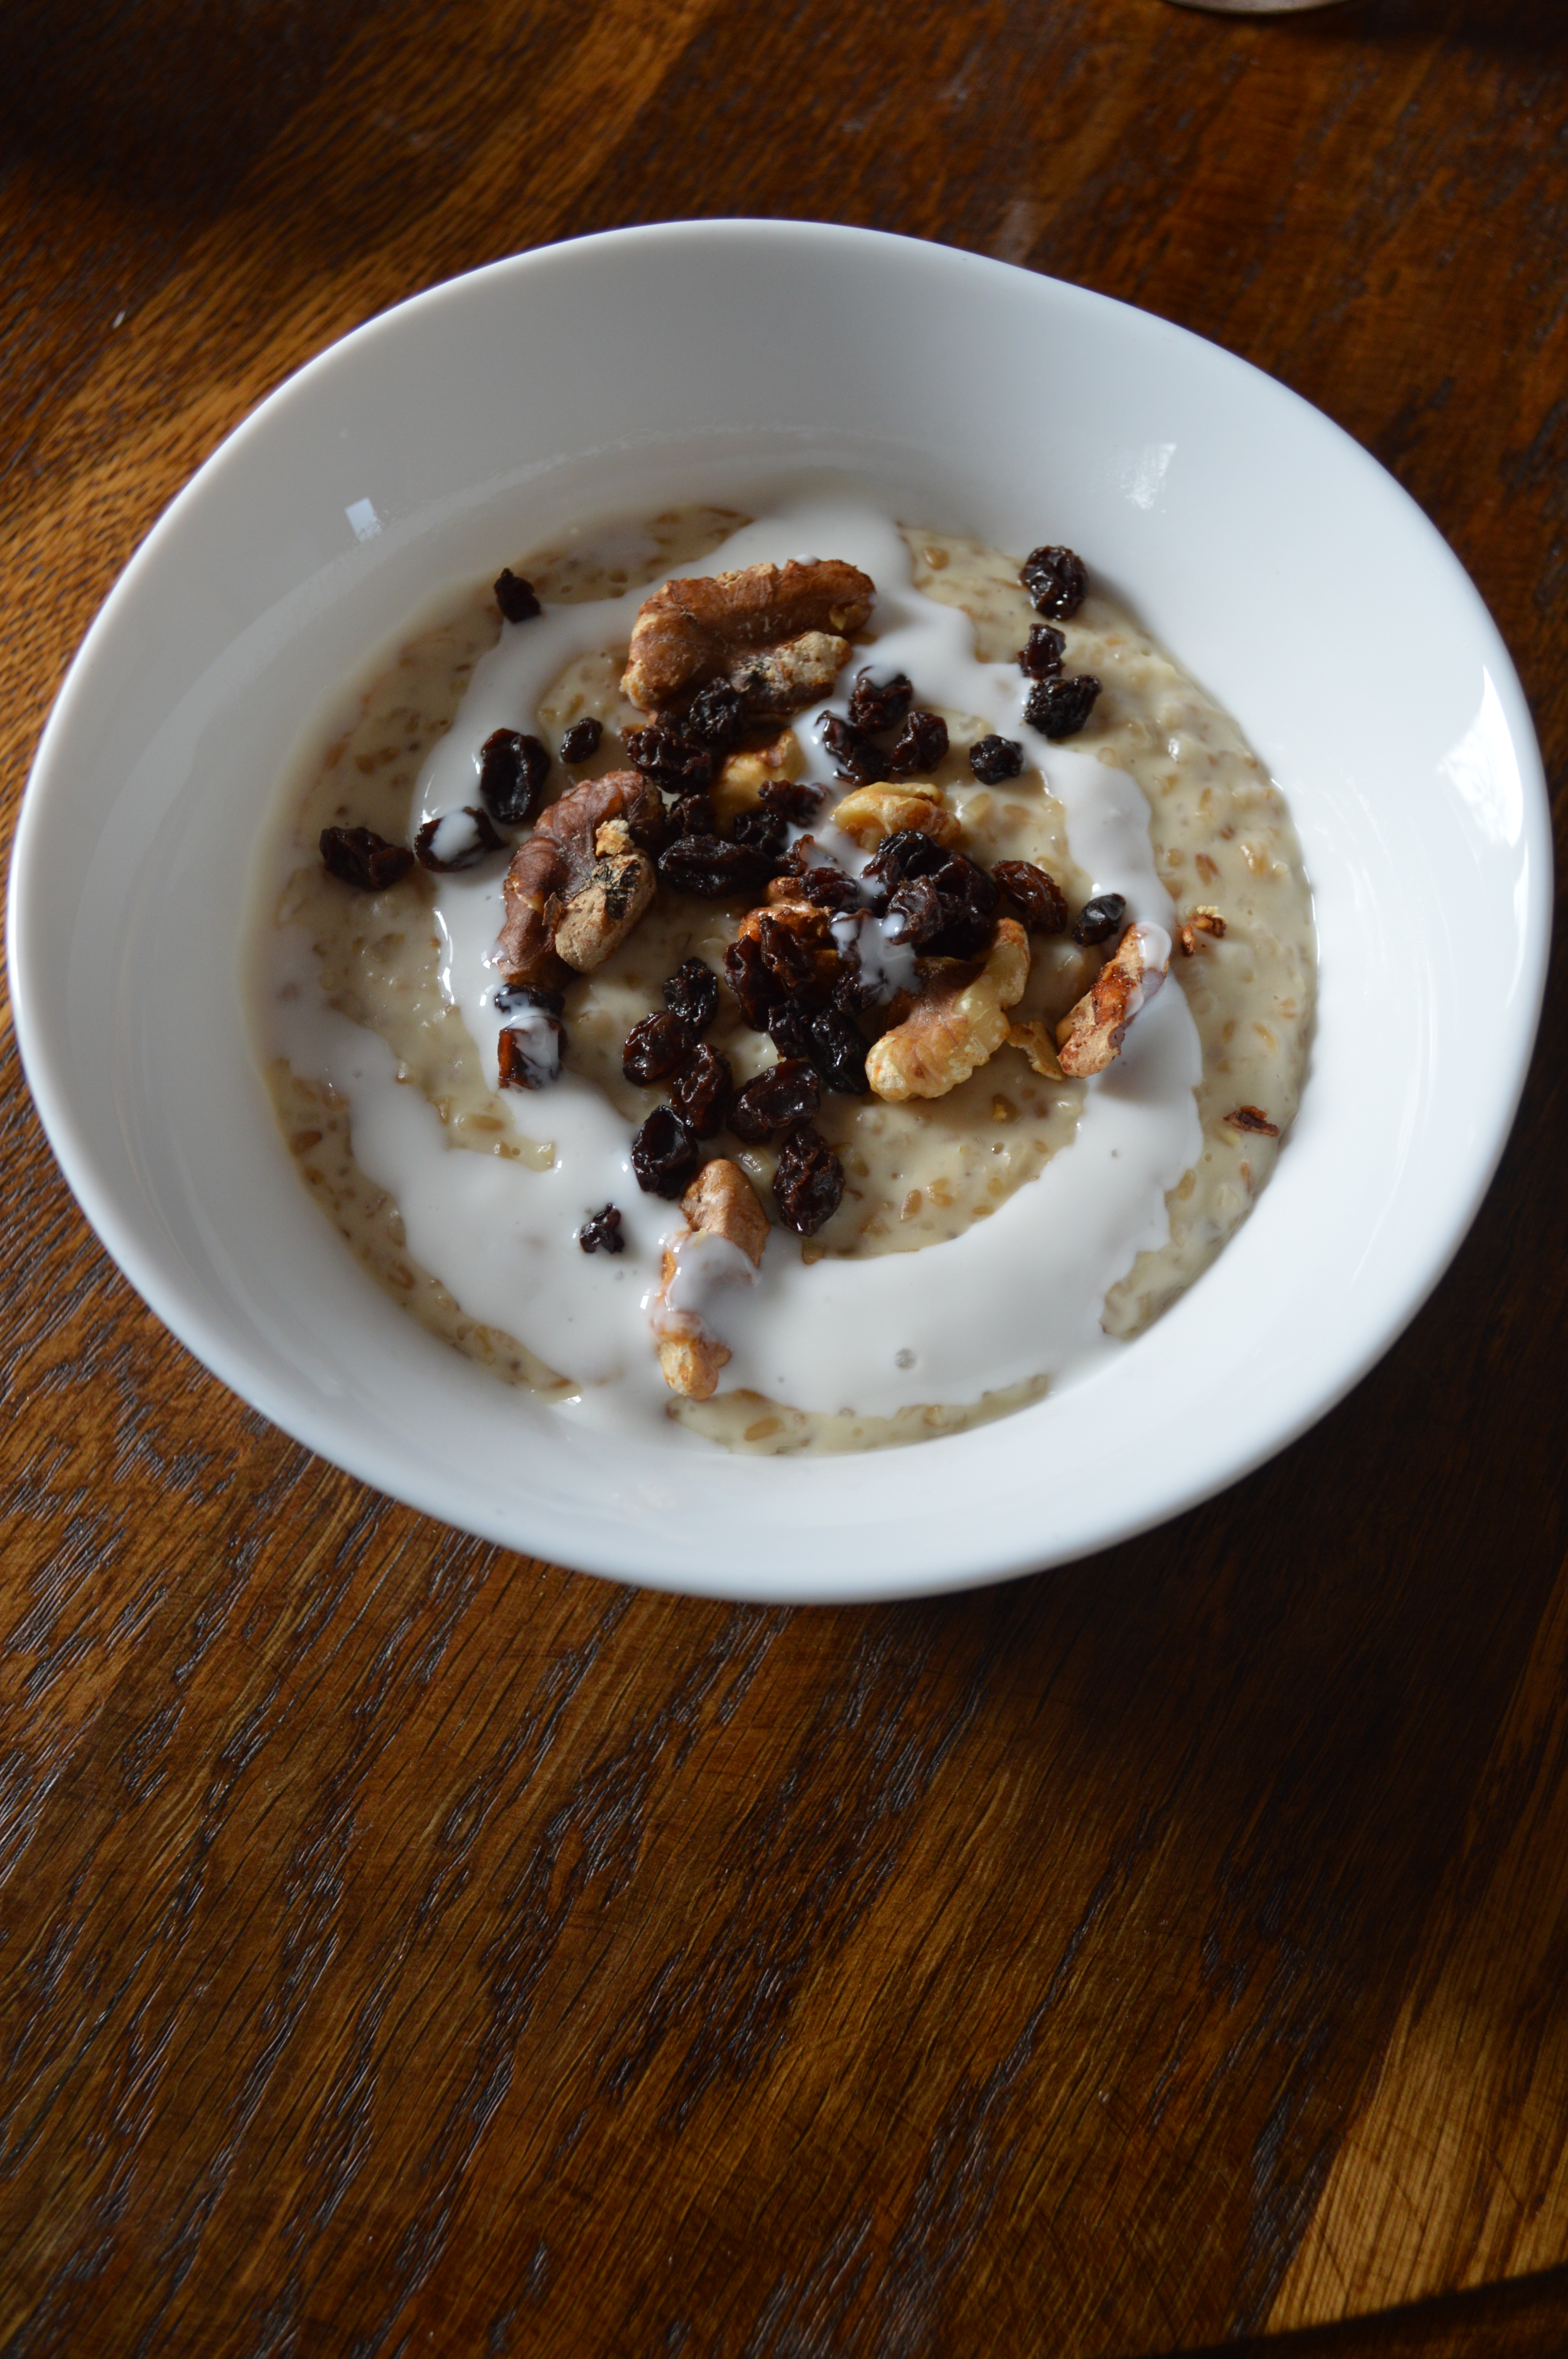 A bowl of porridge with walnuts, dried currants, and buttermilk